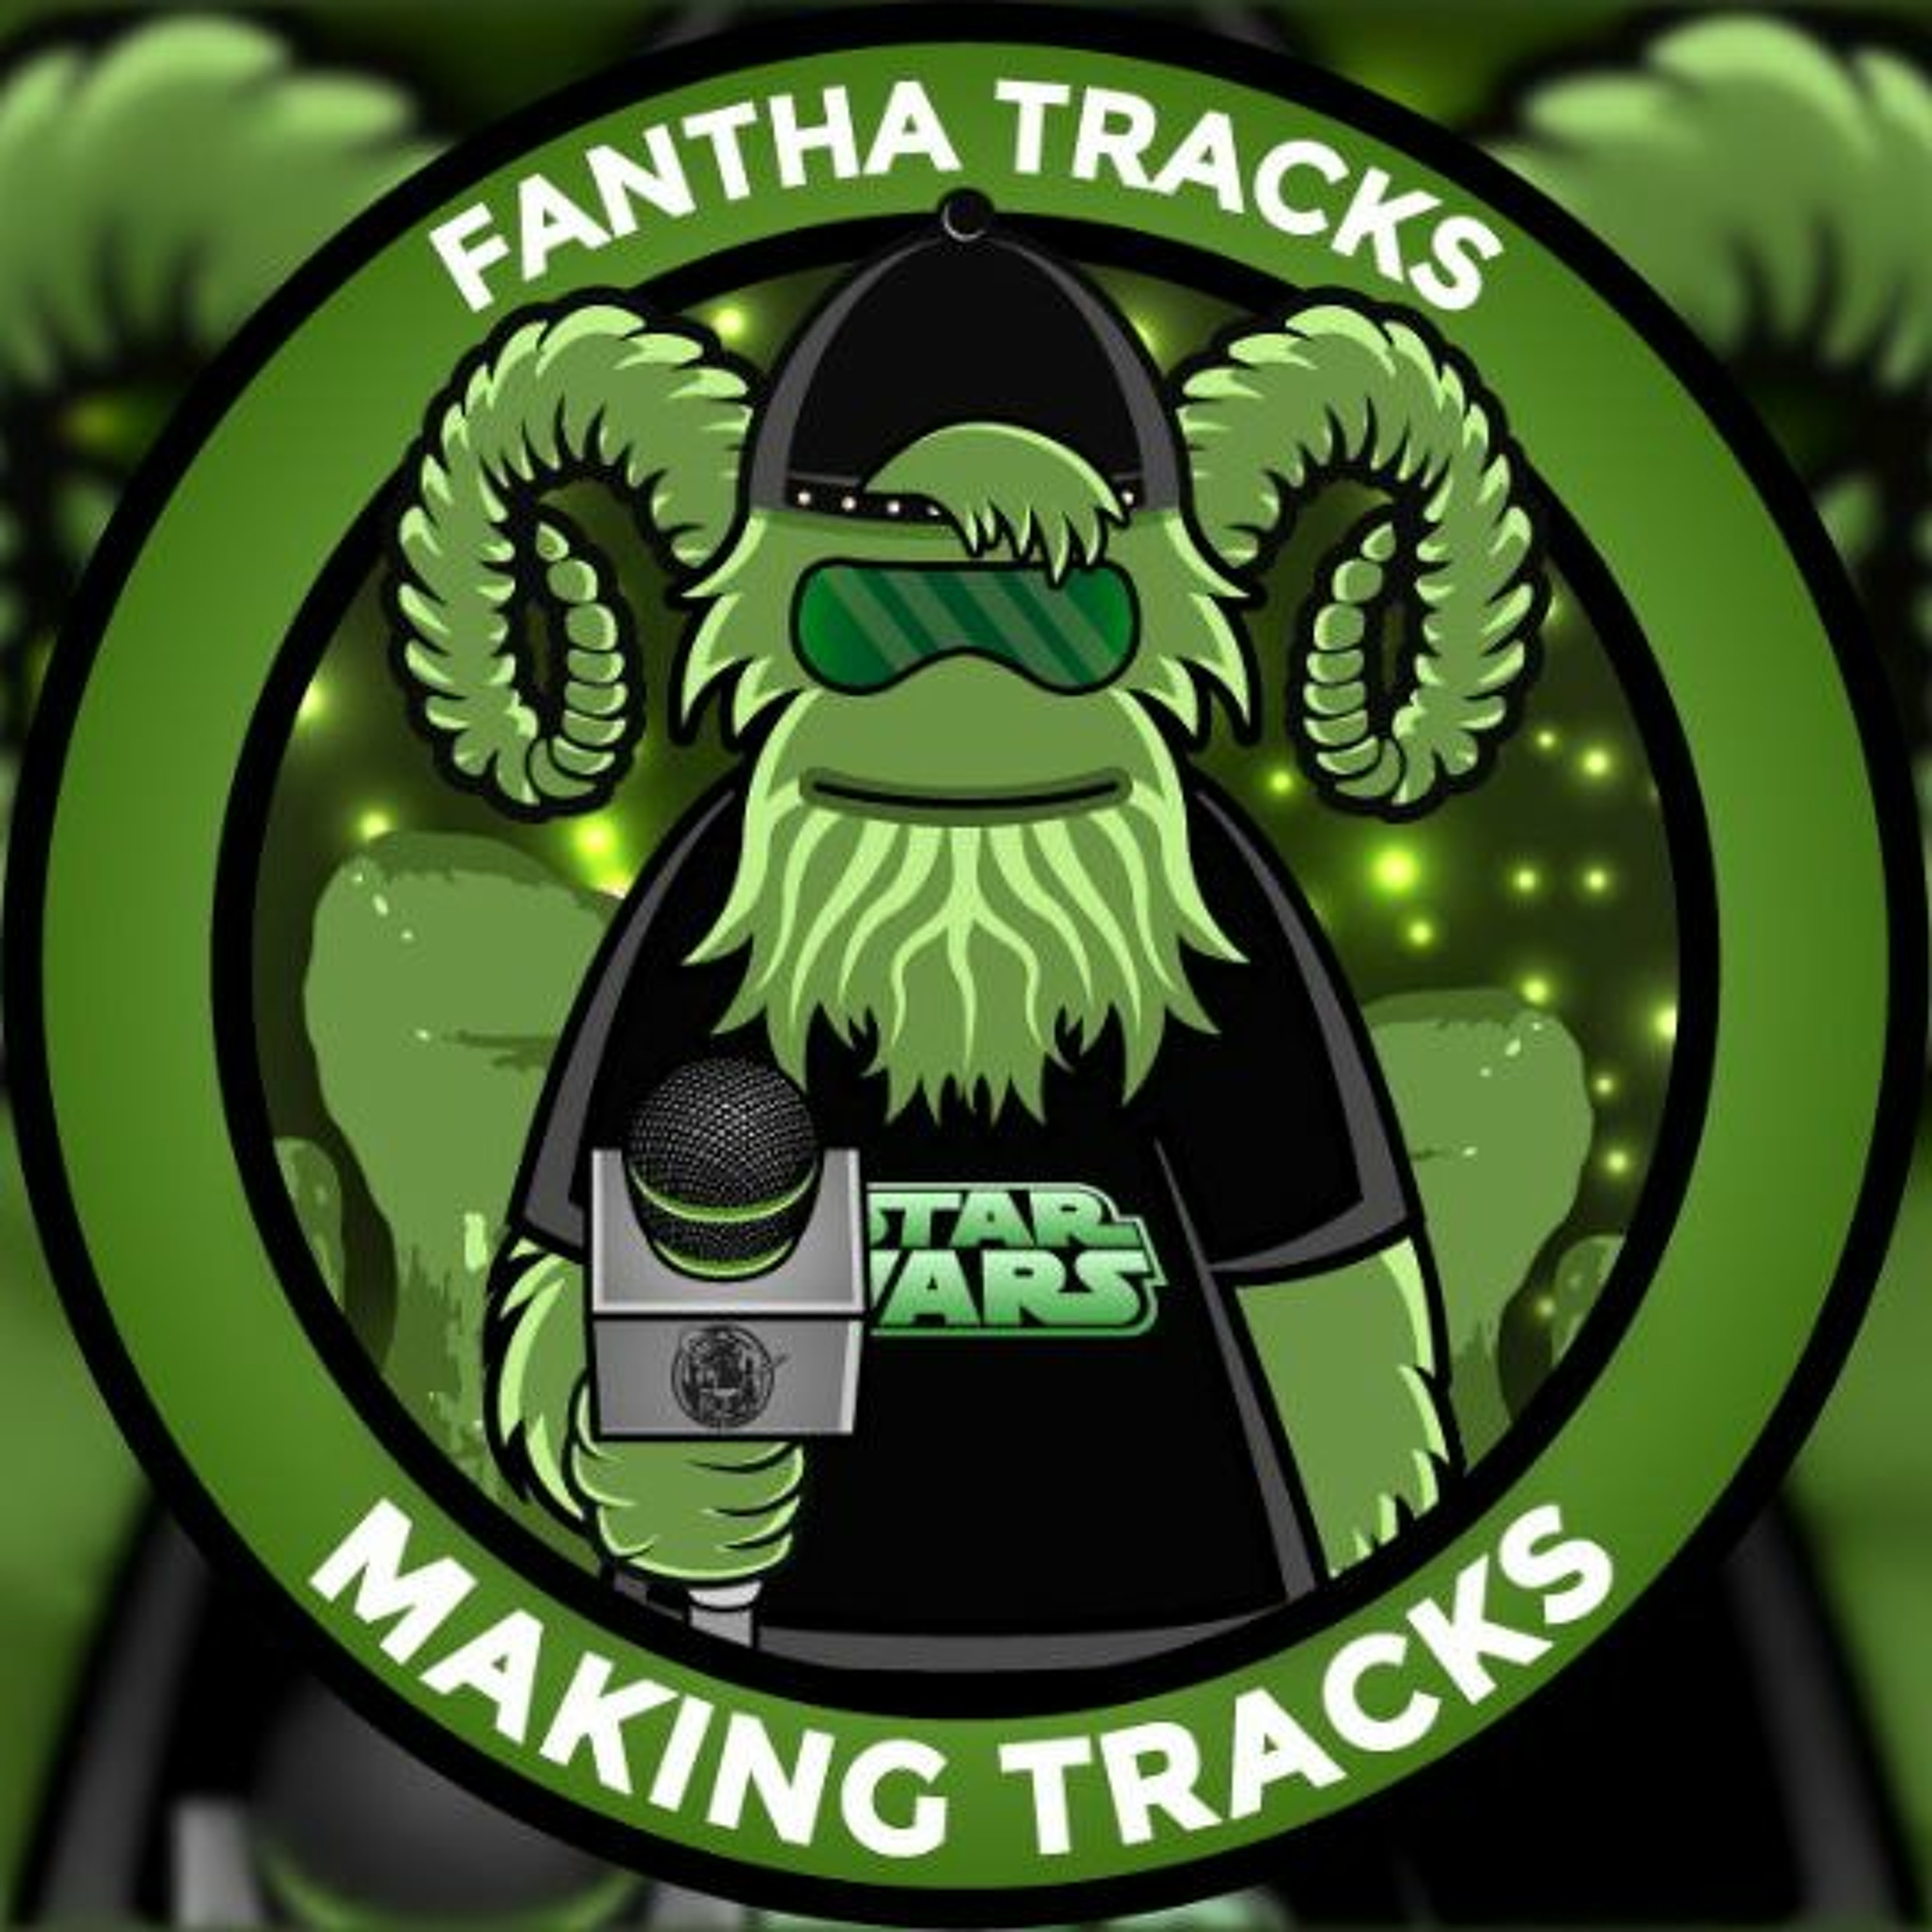 Making Tracks Episode 174: Listeners questions